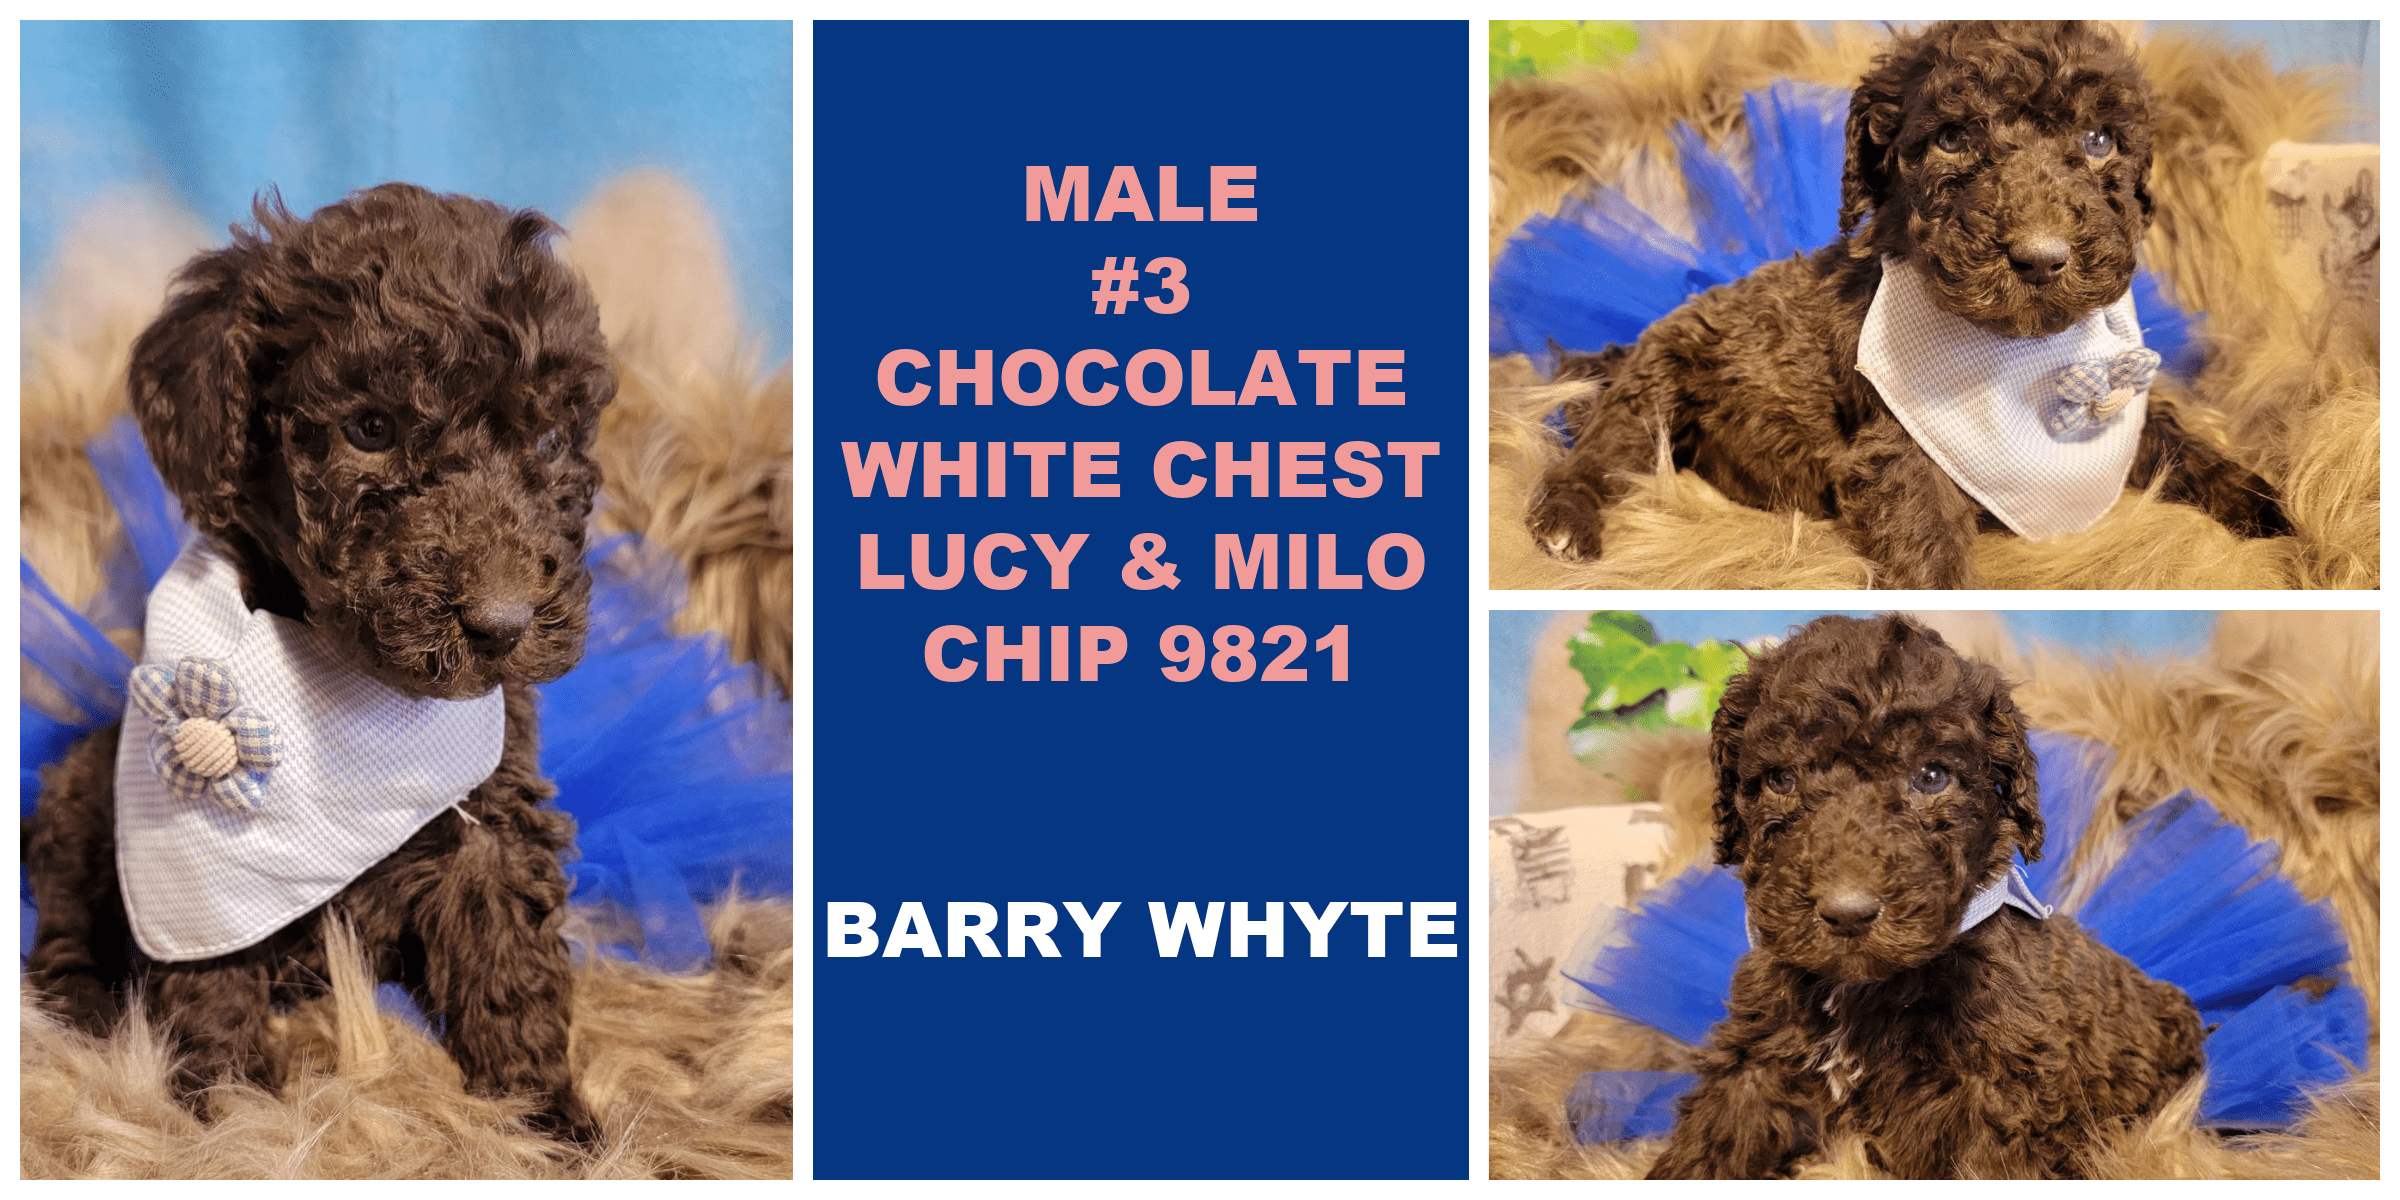 MALE 3 CHOCOLATE WHITE CHEST LUCY MILO CHIP 9821